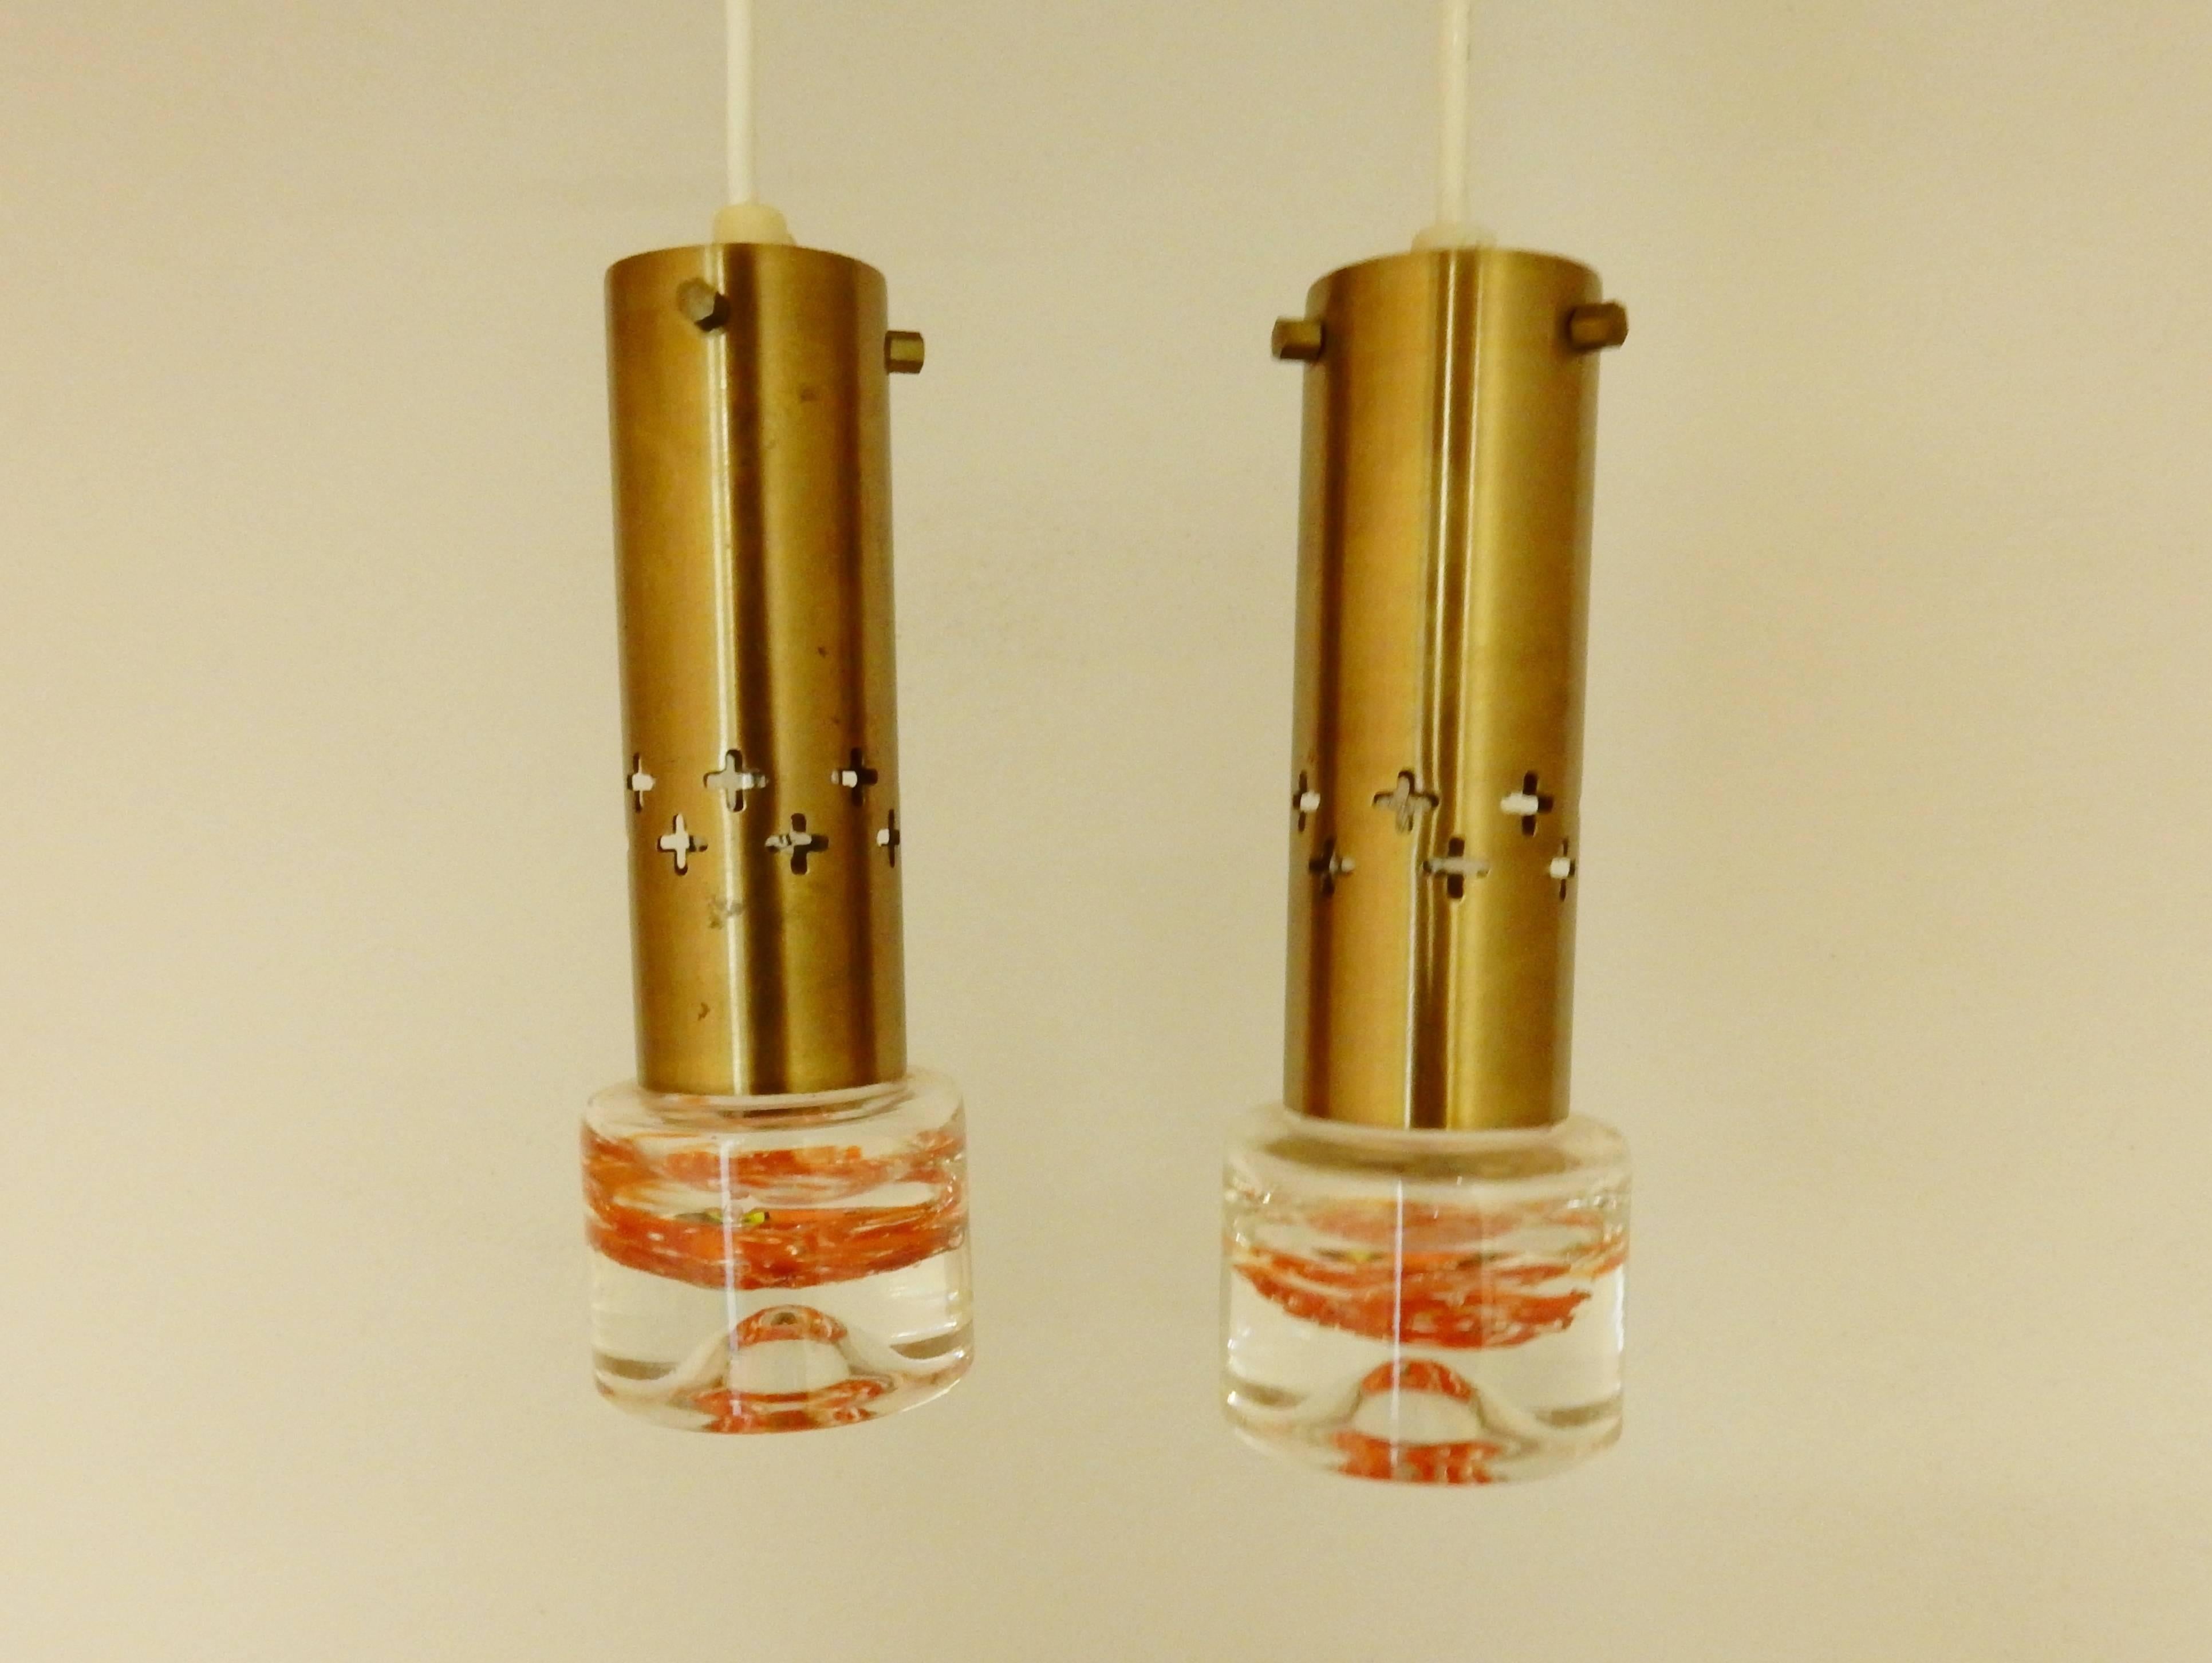 Set of Two Swedish Pendant Lights in Brass and Glass, Sweden, 1960s-1970s For Sale 1